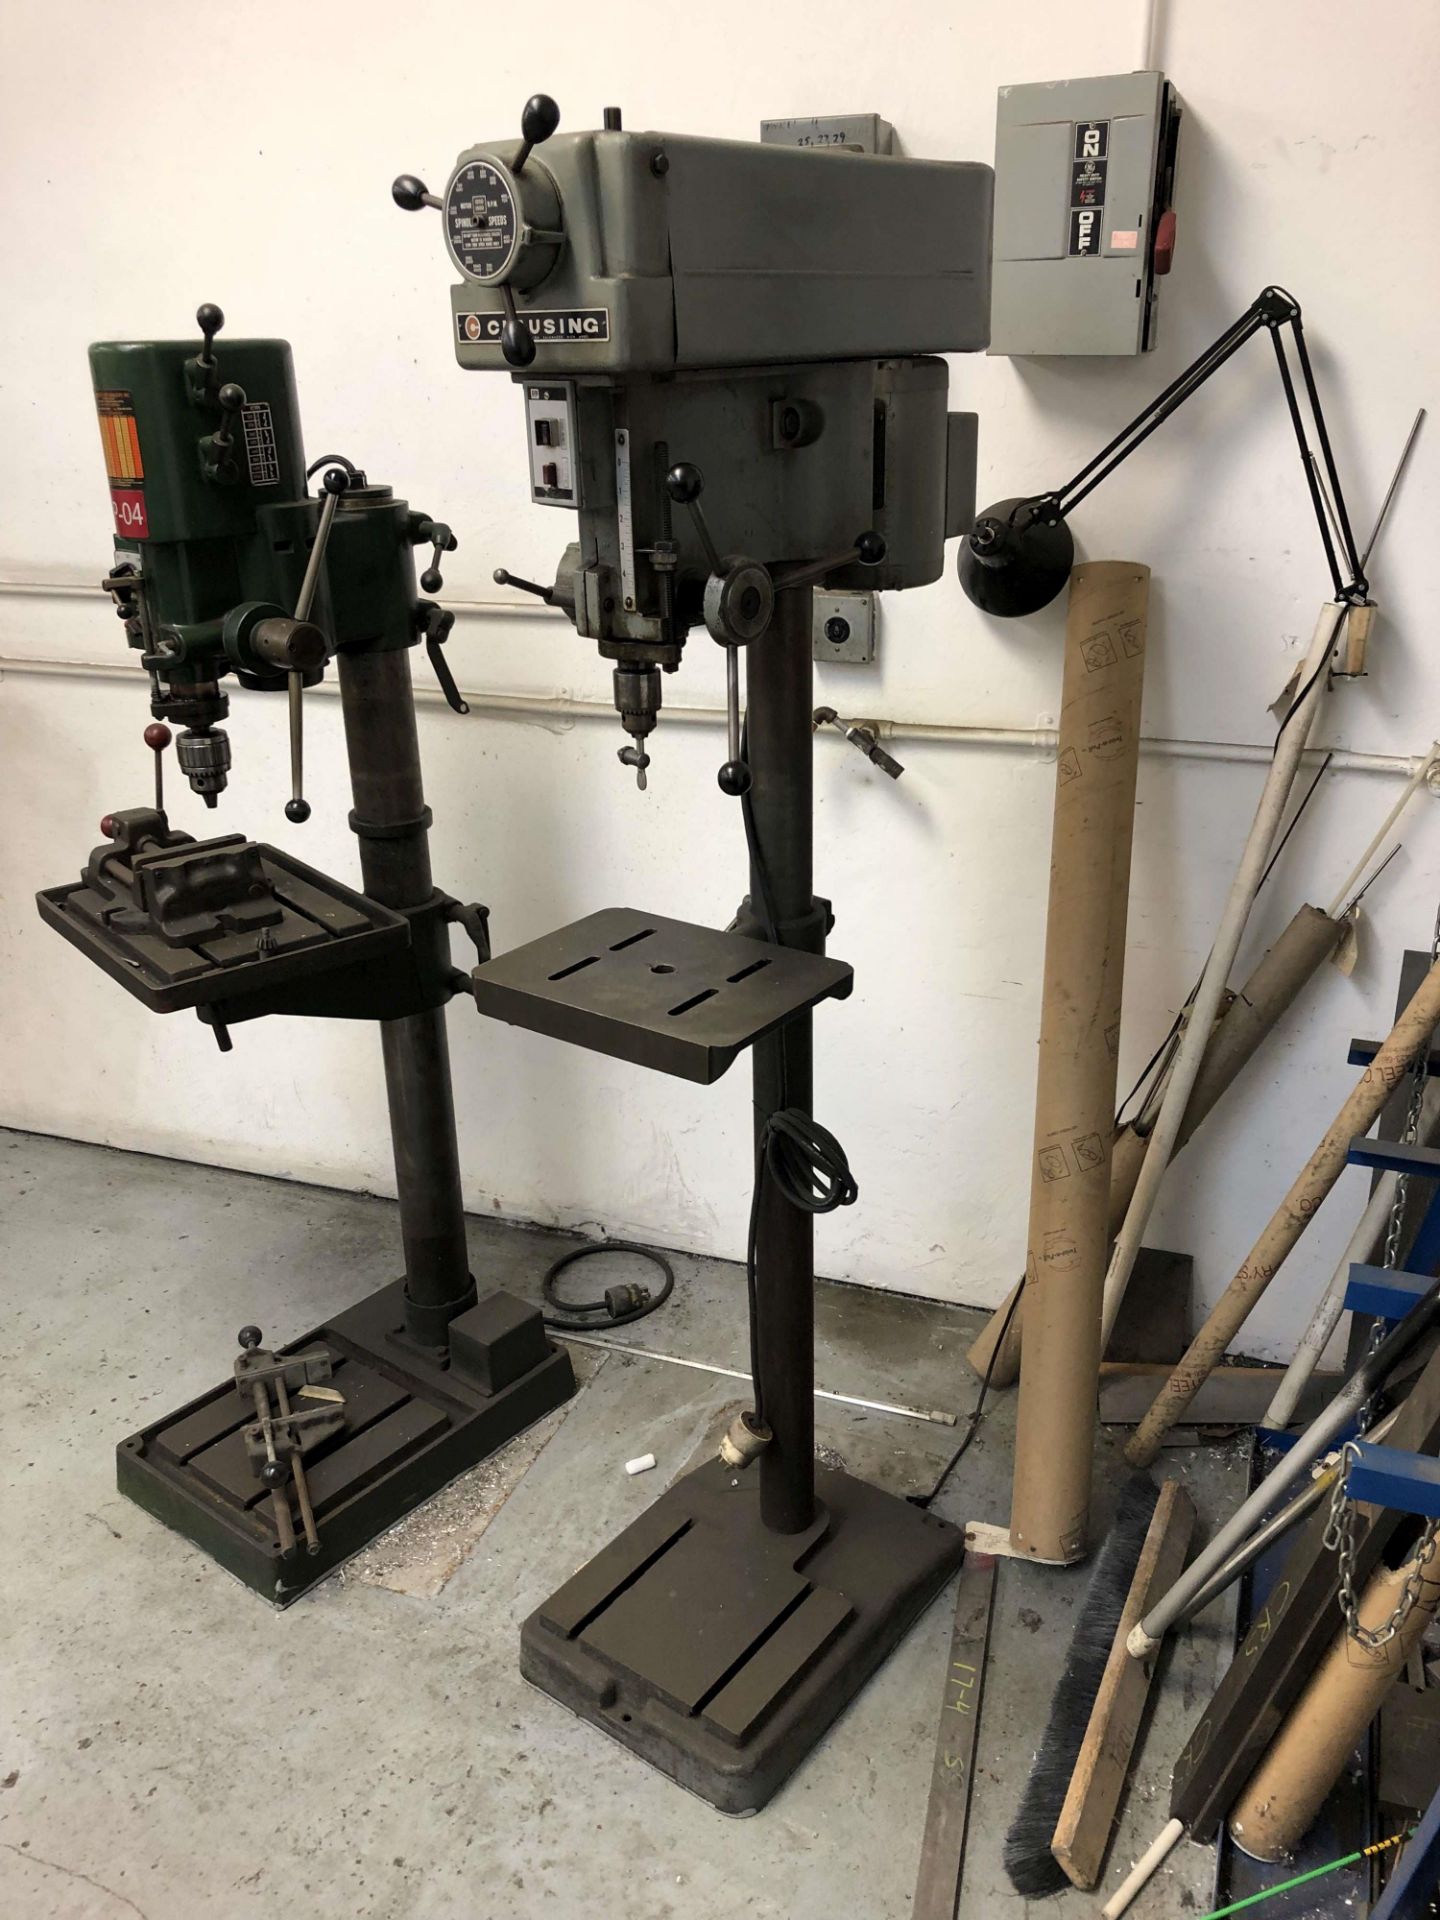 Clausing 15" Floor Drill Press, Model 1670, 330 to 4000 RPM, 3/4 HP, Table: 14" L to R, 10" F to - Image 2 of 3